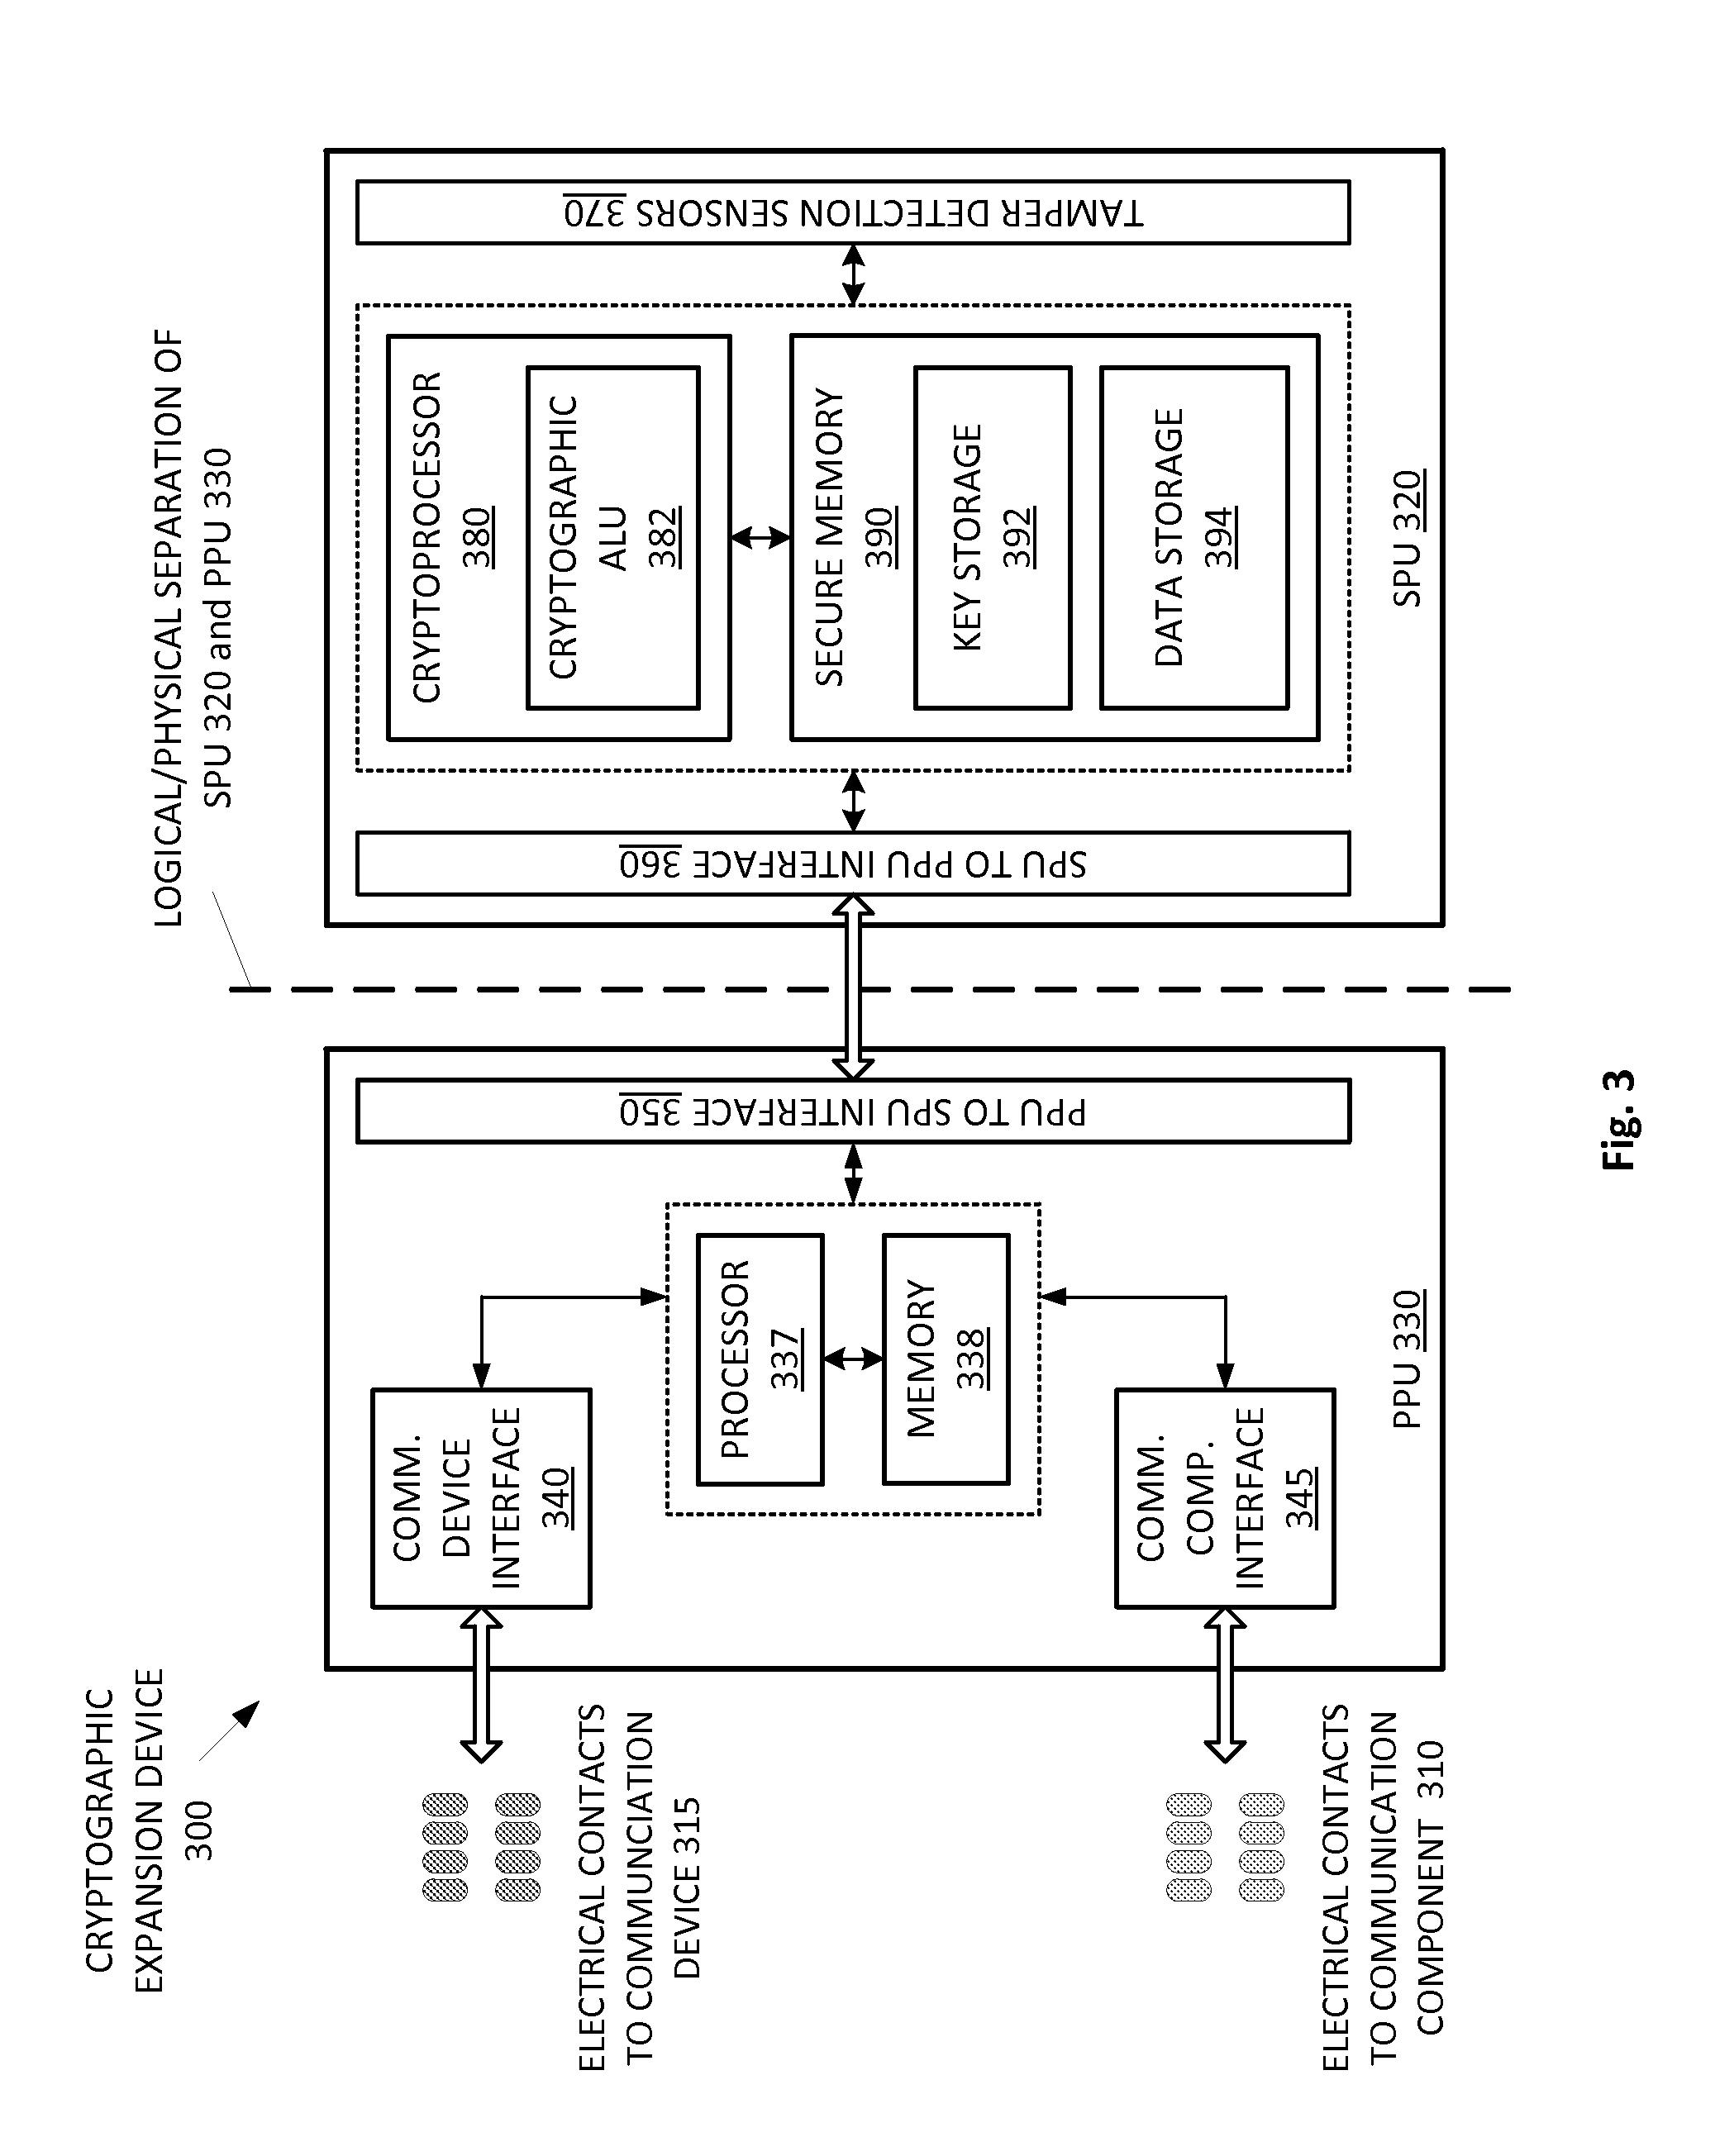 Cryptographic expansion device and related protocols